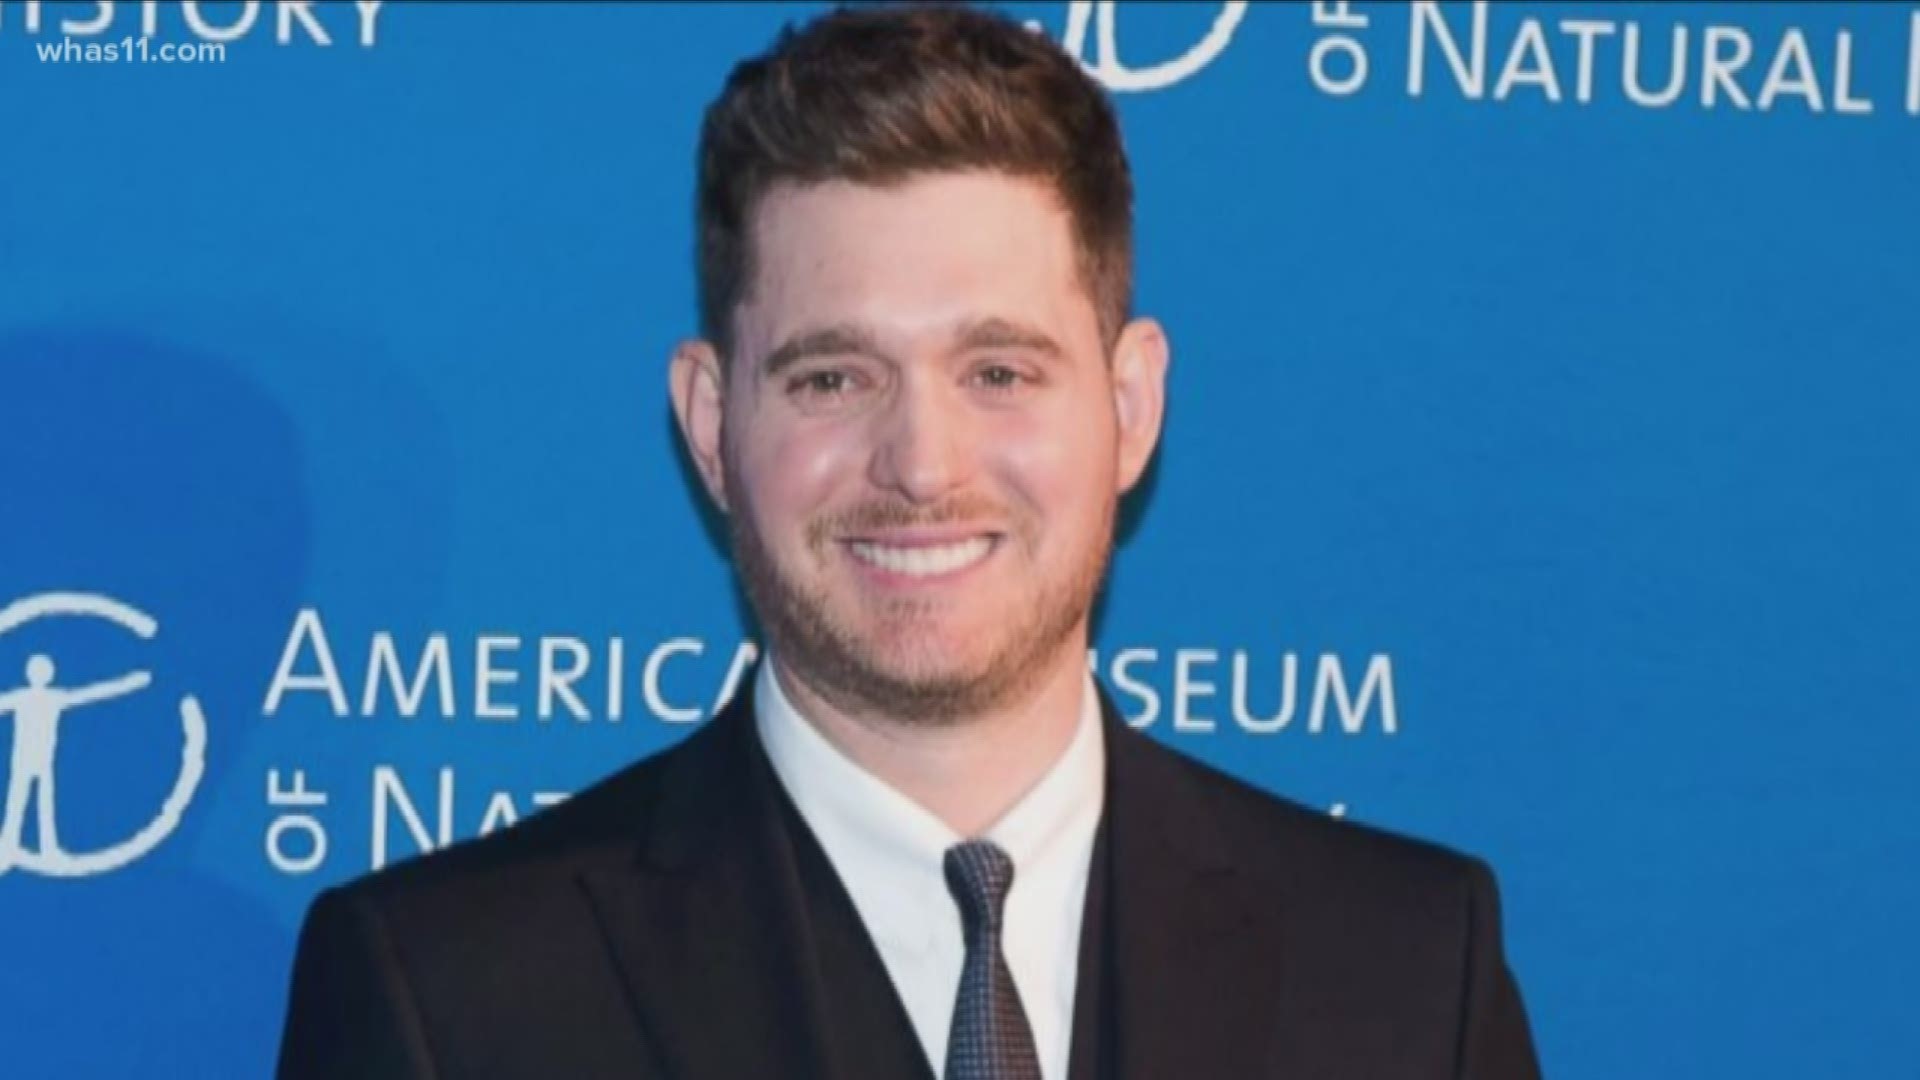 Bublé has announced 27 new North American tour dates in 2020... and Louisville is included!